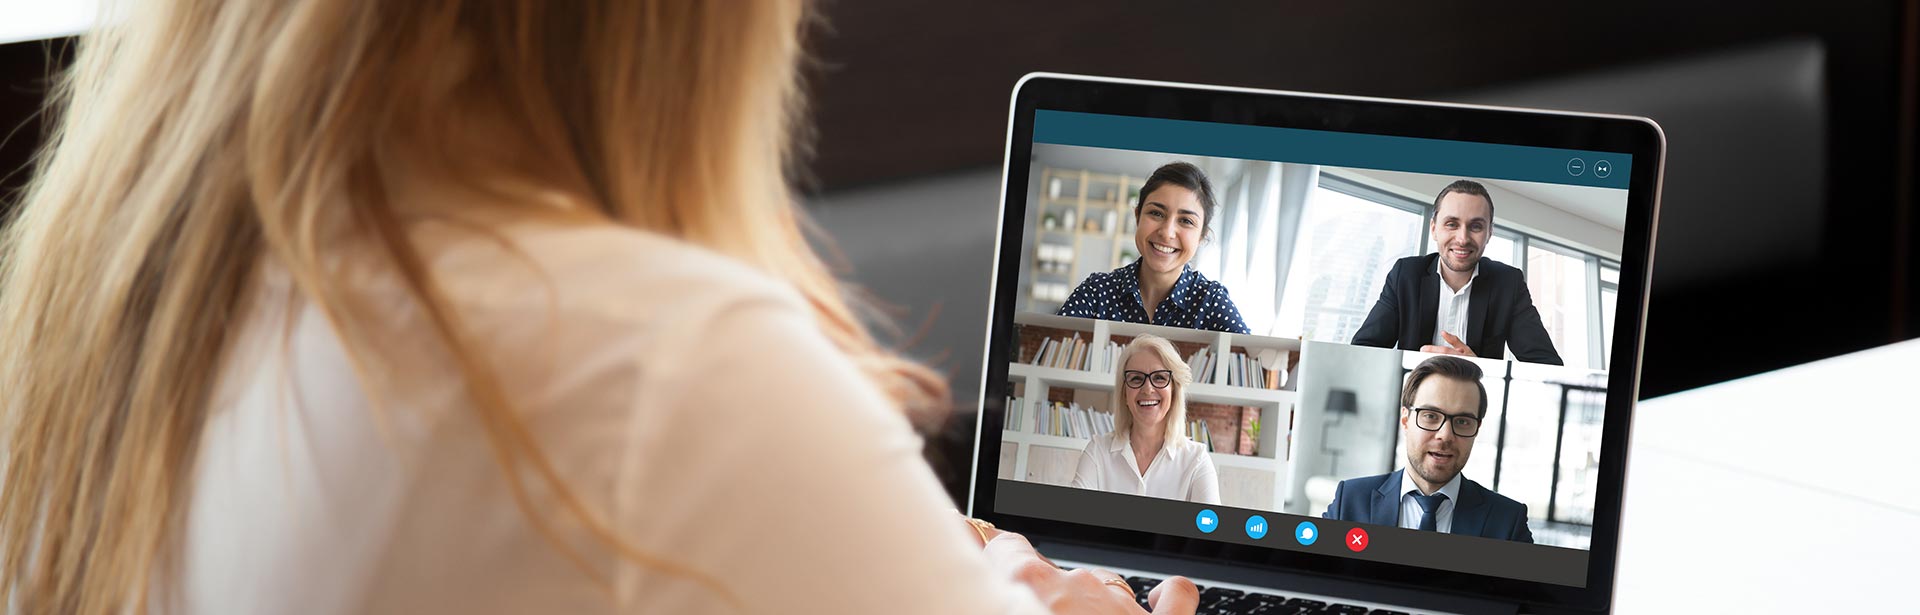 Connecting with colleagues through online meetings